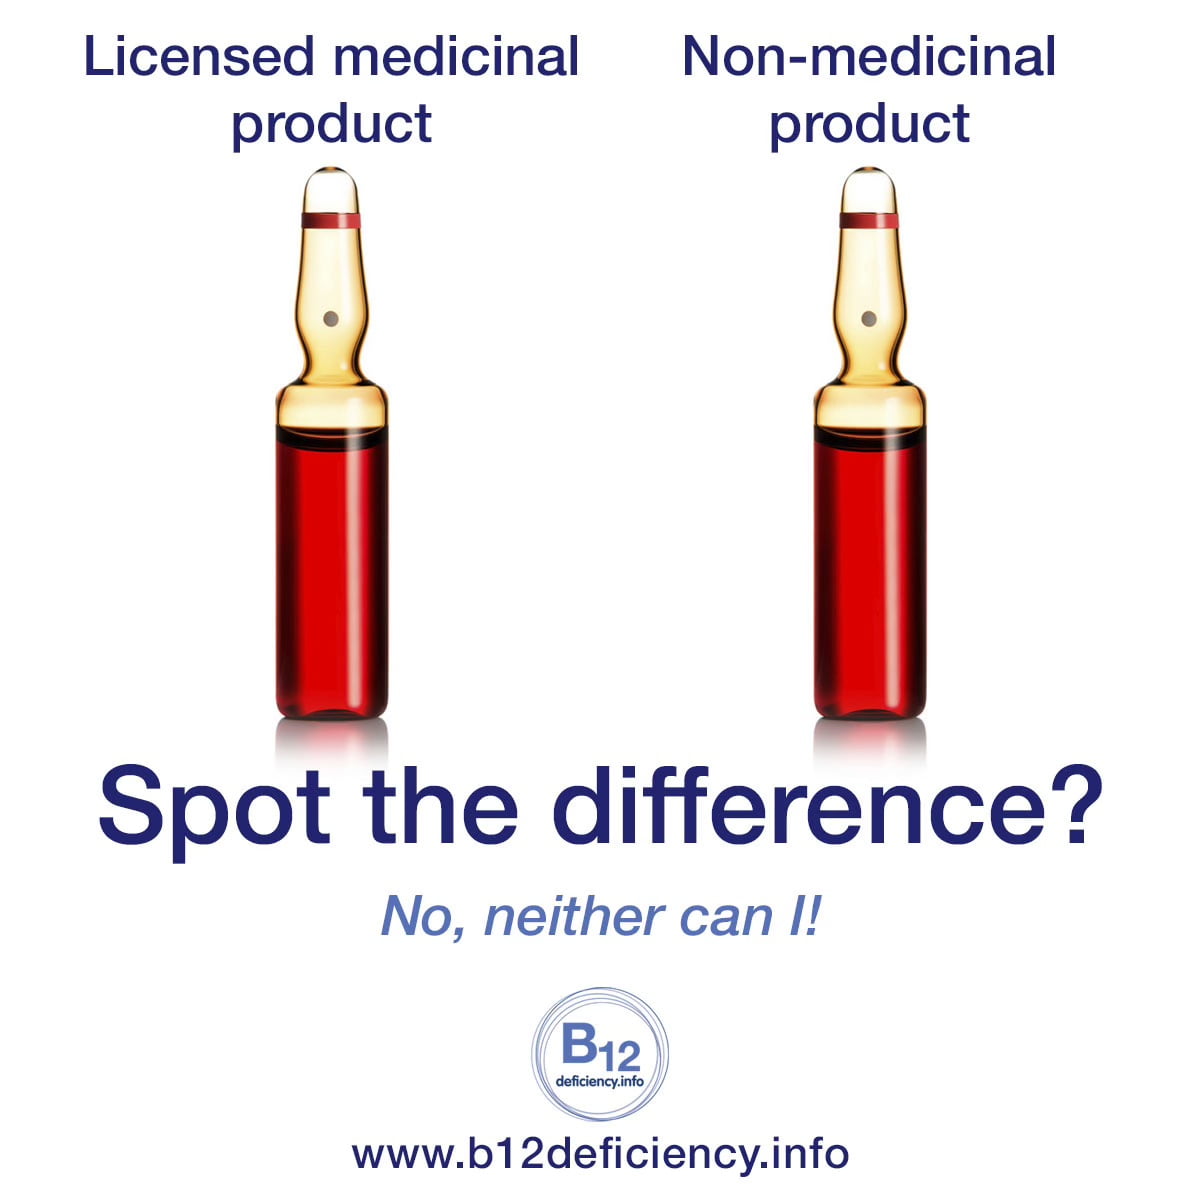 MHRA Double standards on vitamin B12 injections